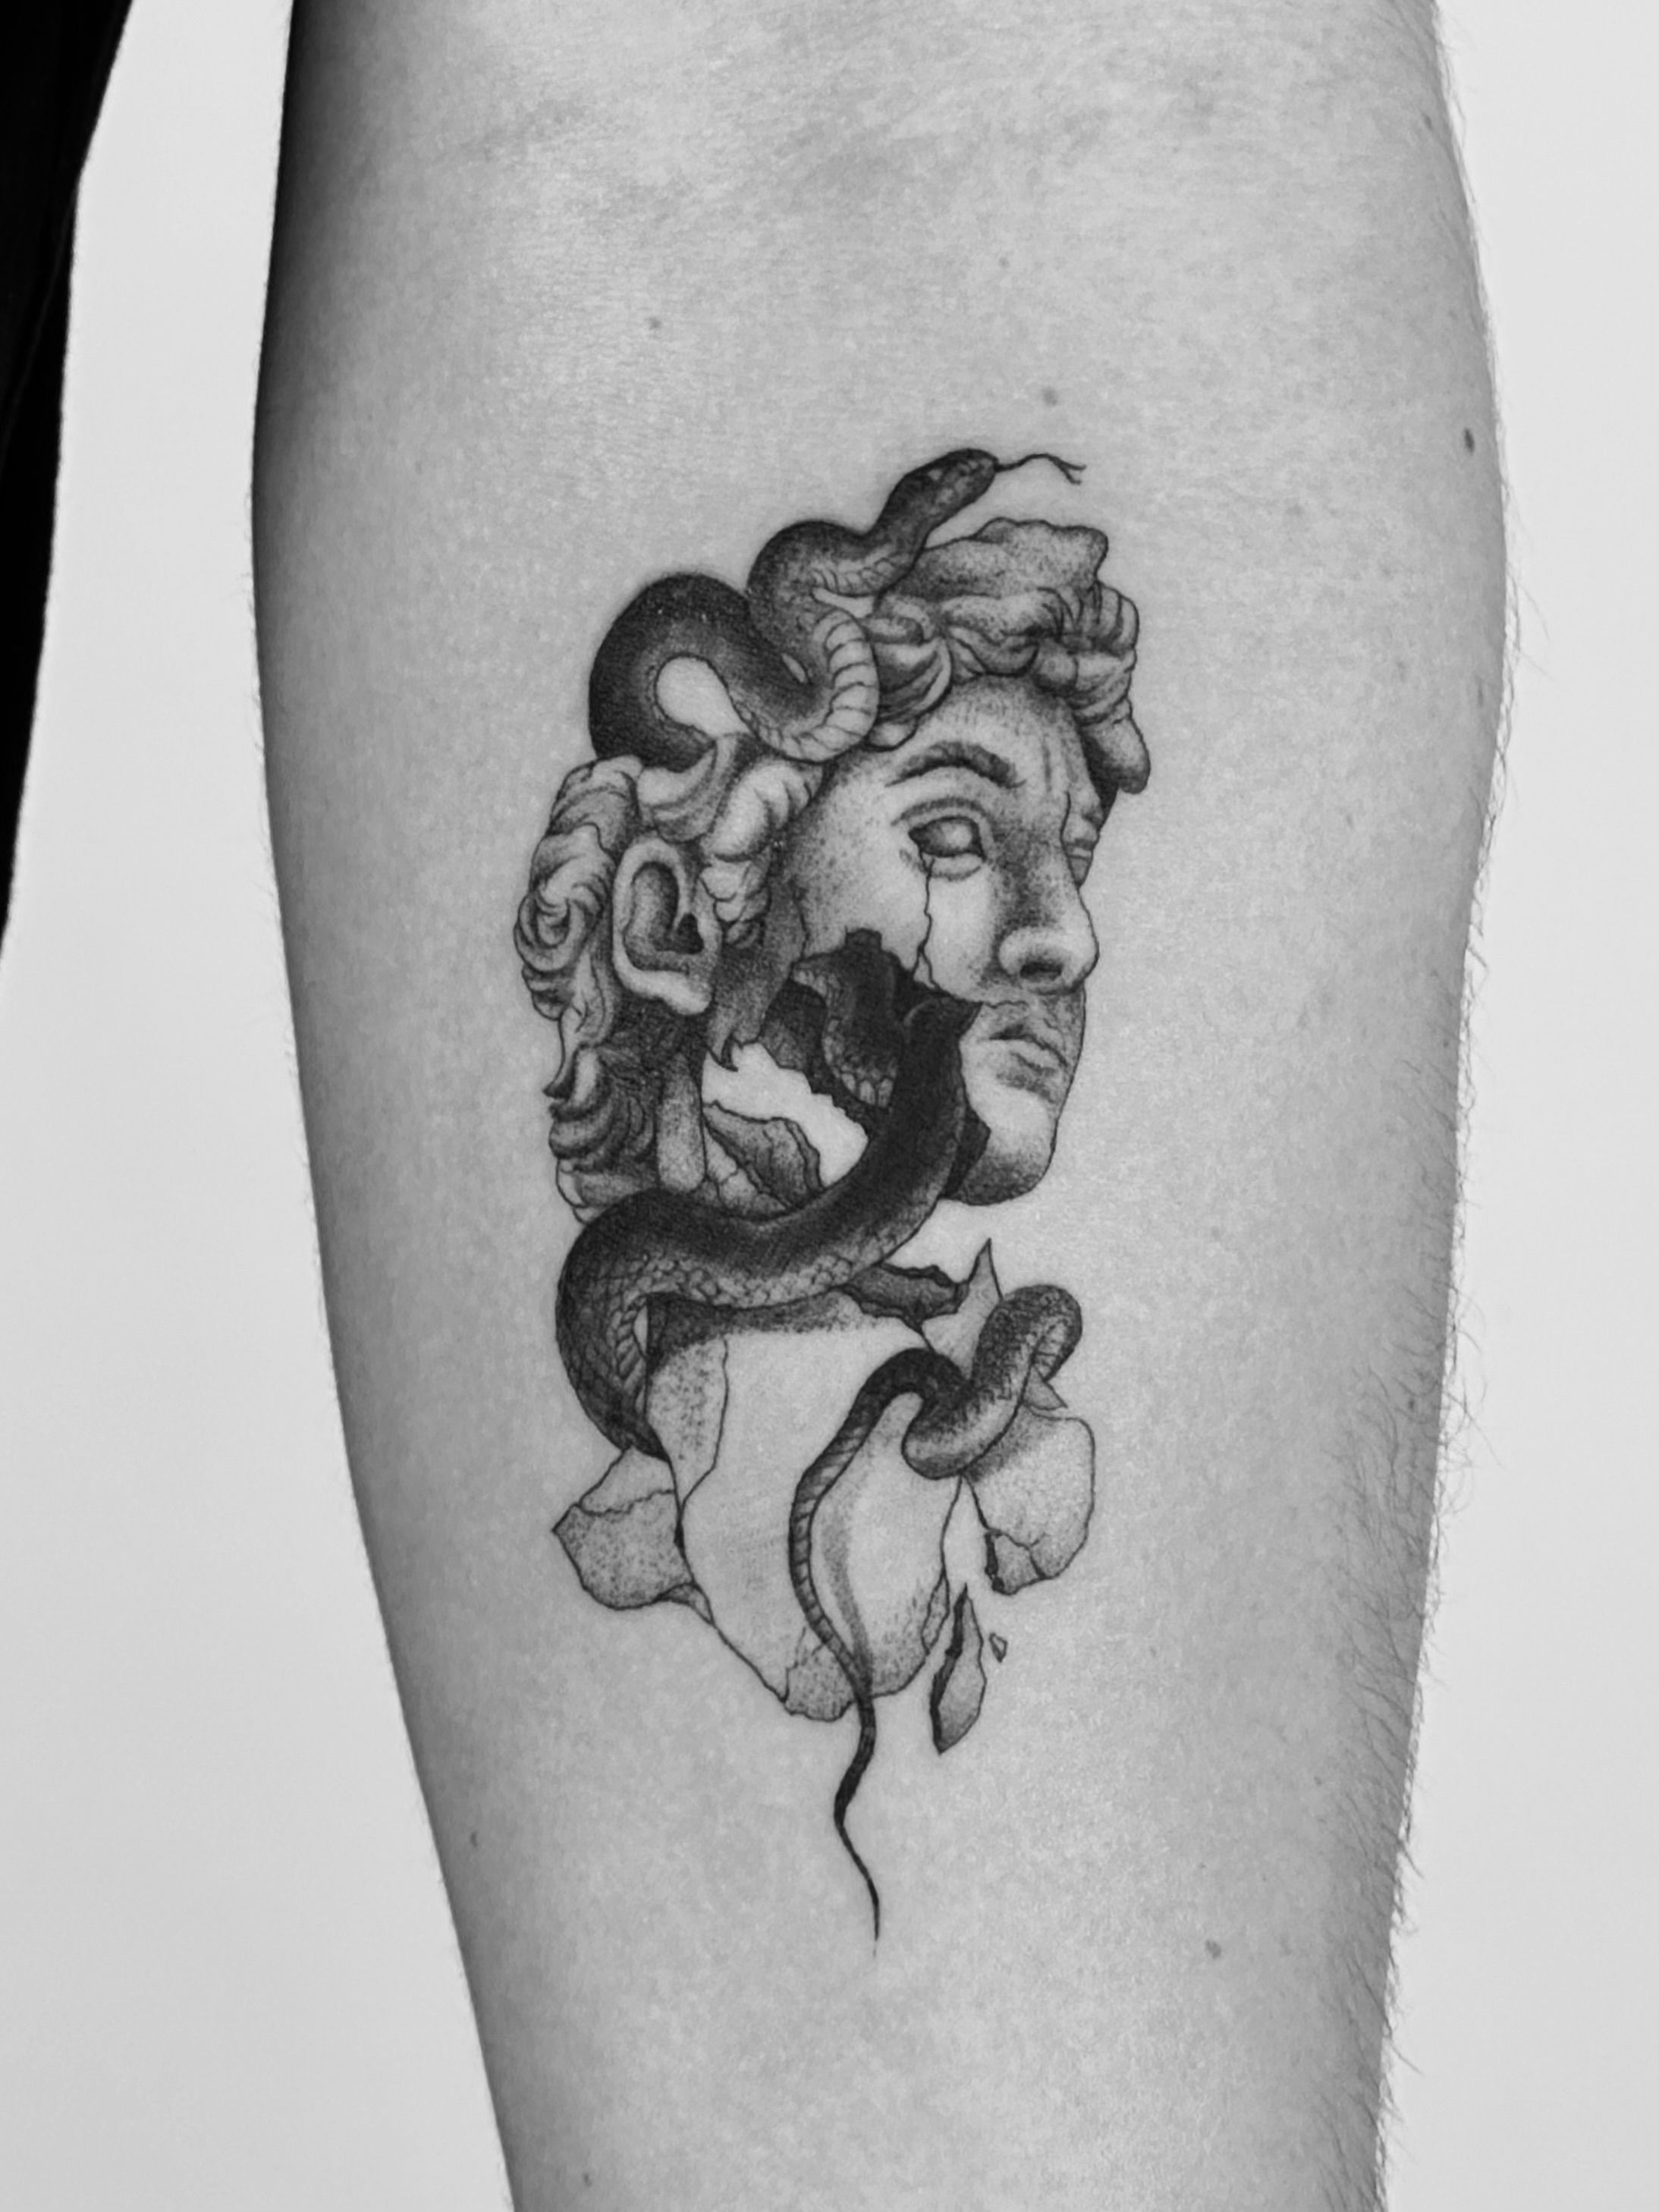 106 Classical Art-Inspired Tattoos You Never Knew You Needed Until Now |  Bored Panda